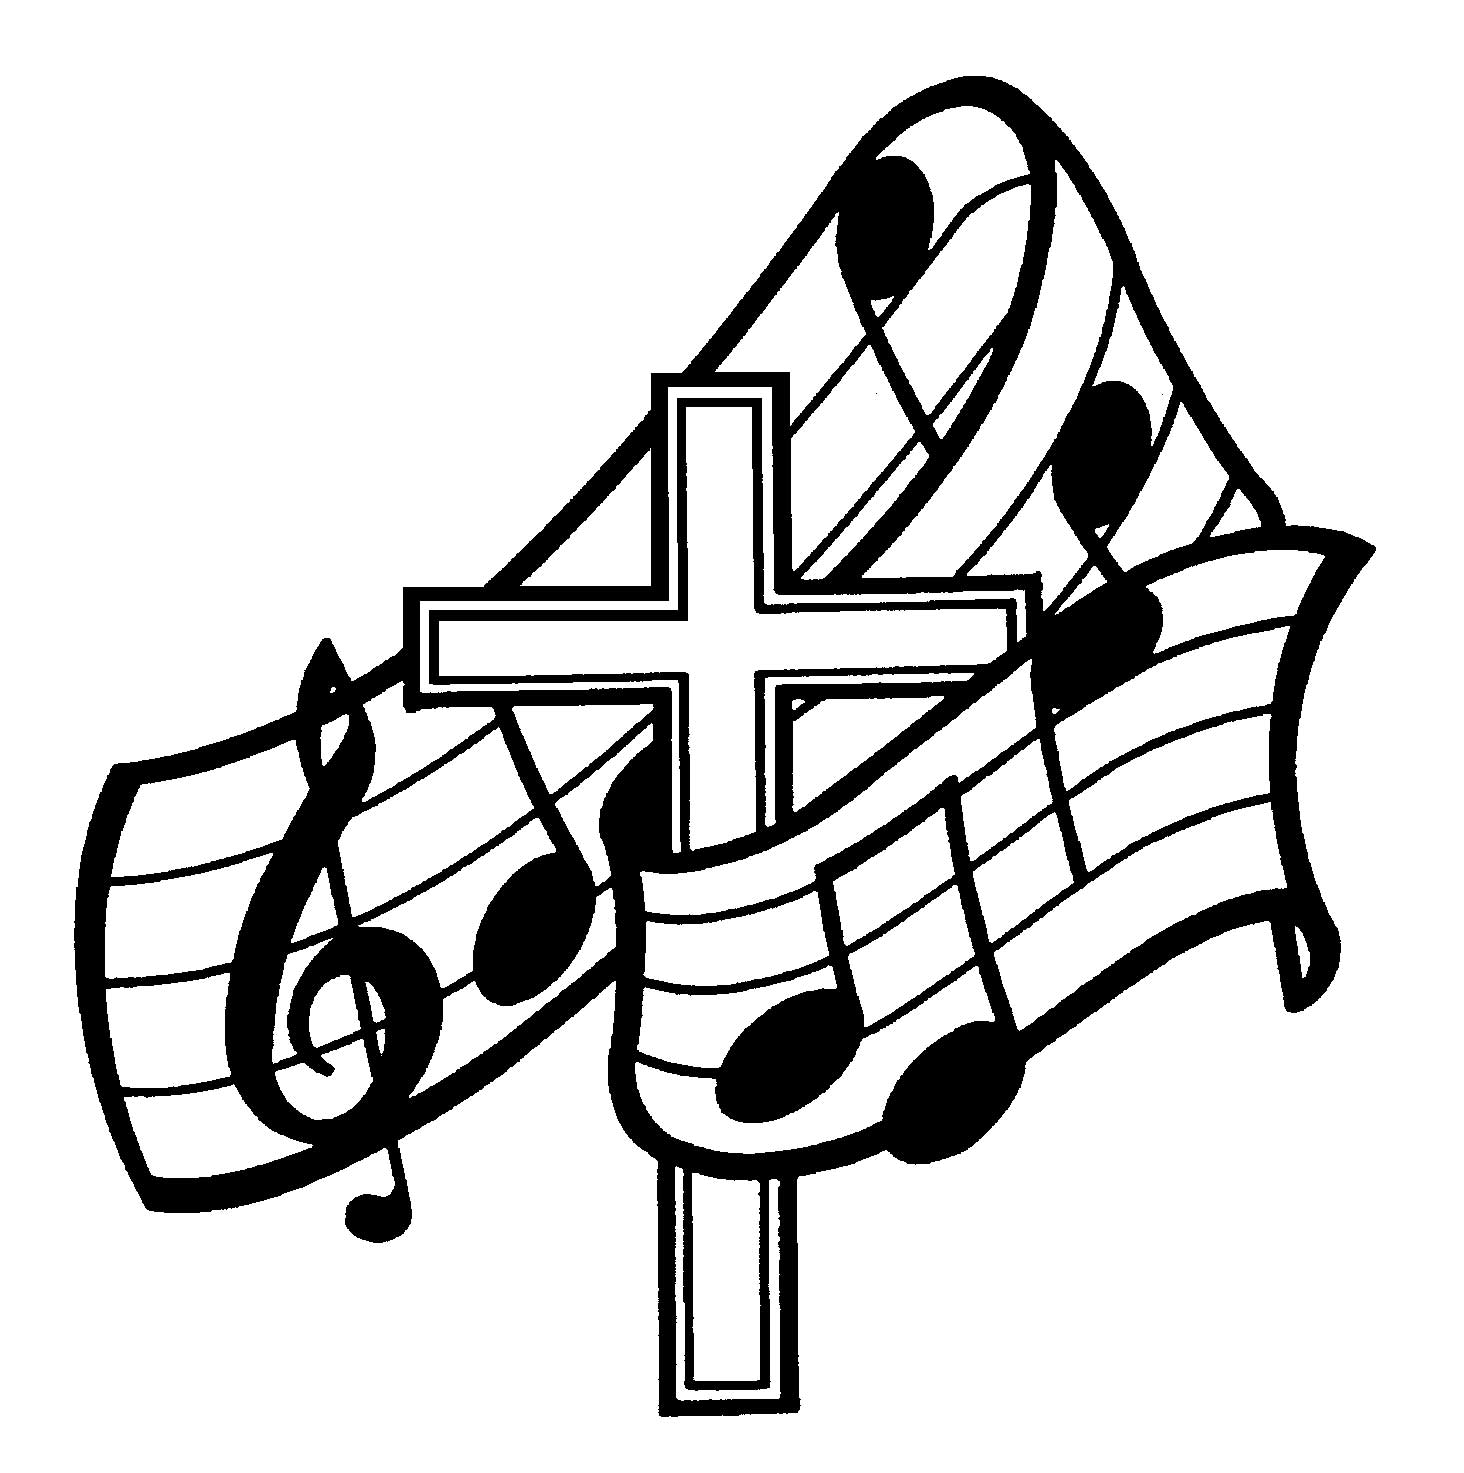 music ministry clipart - photo #1